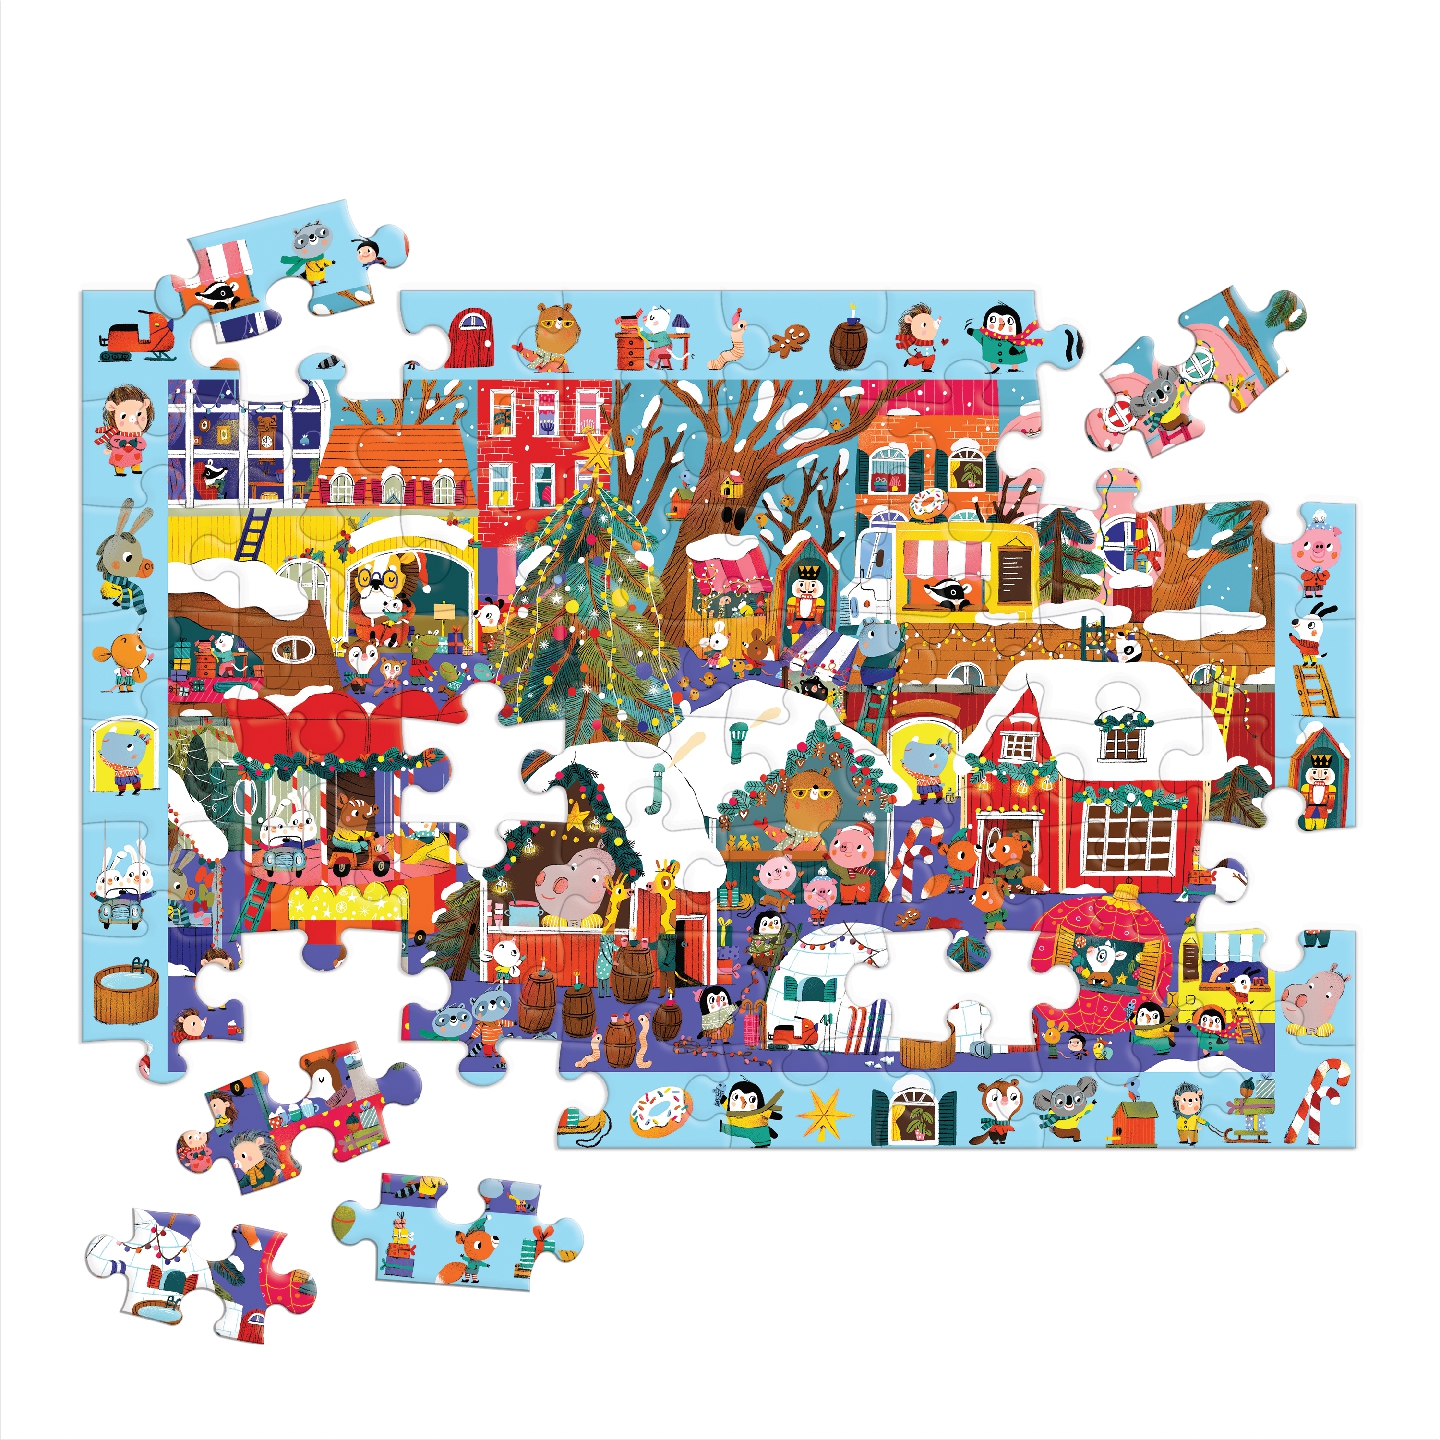 Christmas Market 64 Piece Search & Find Puzzle